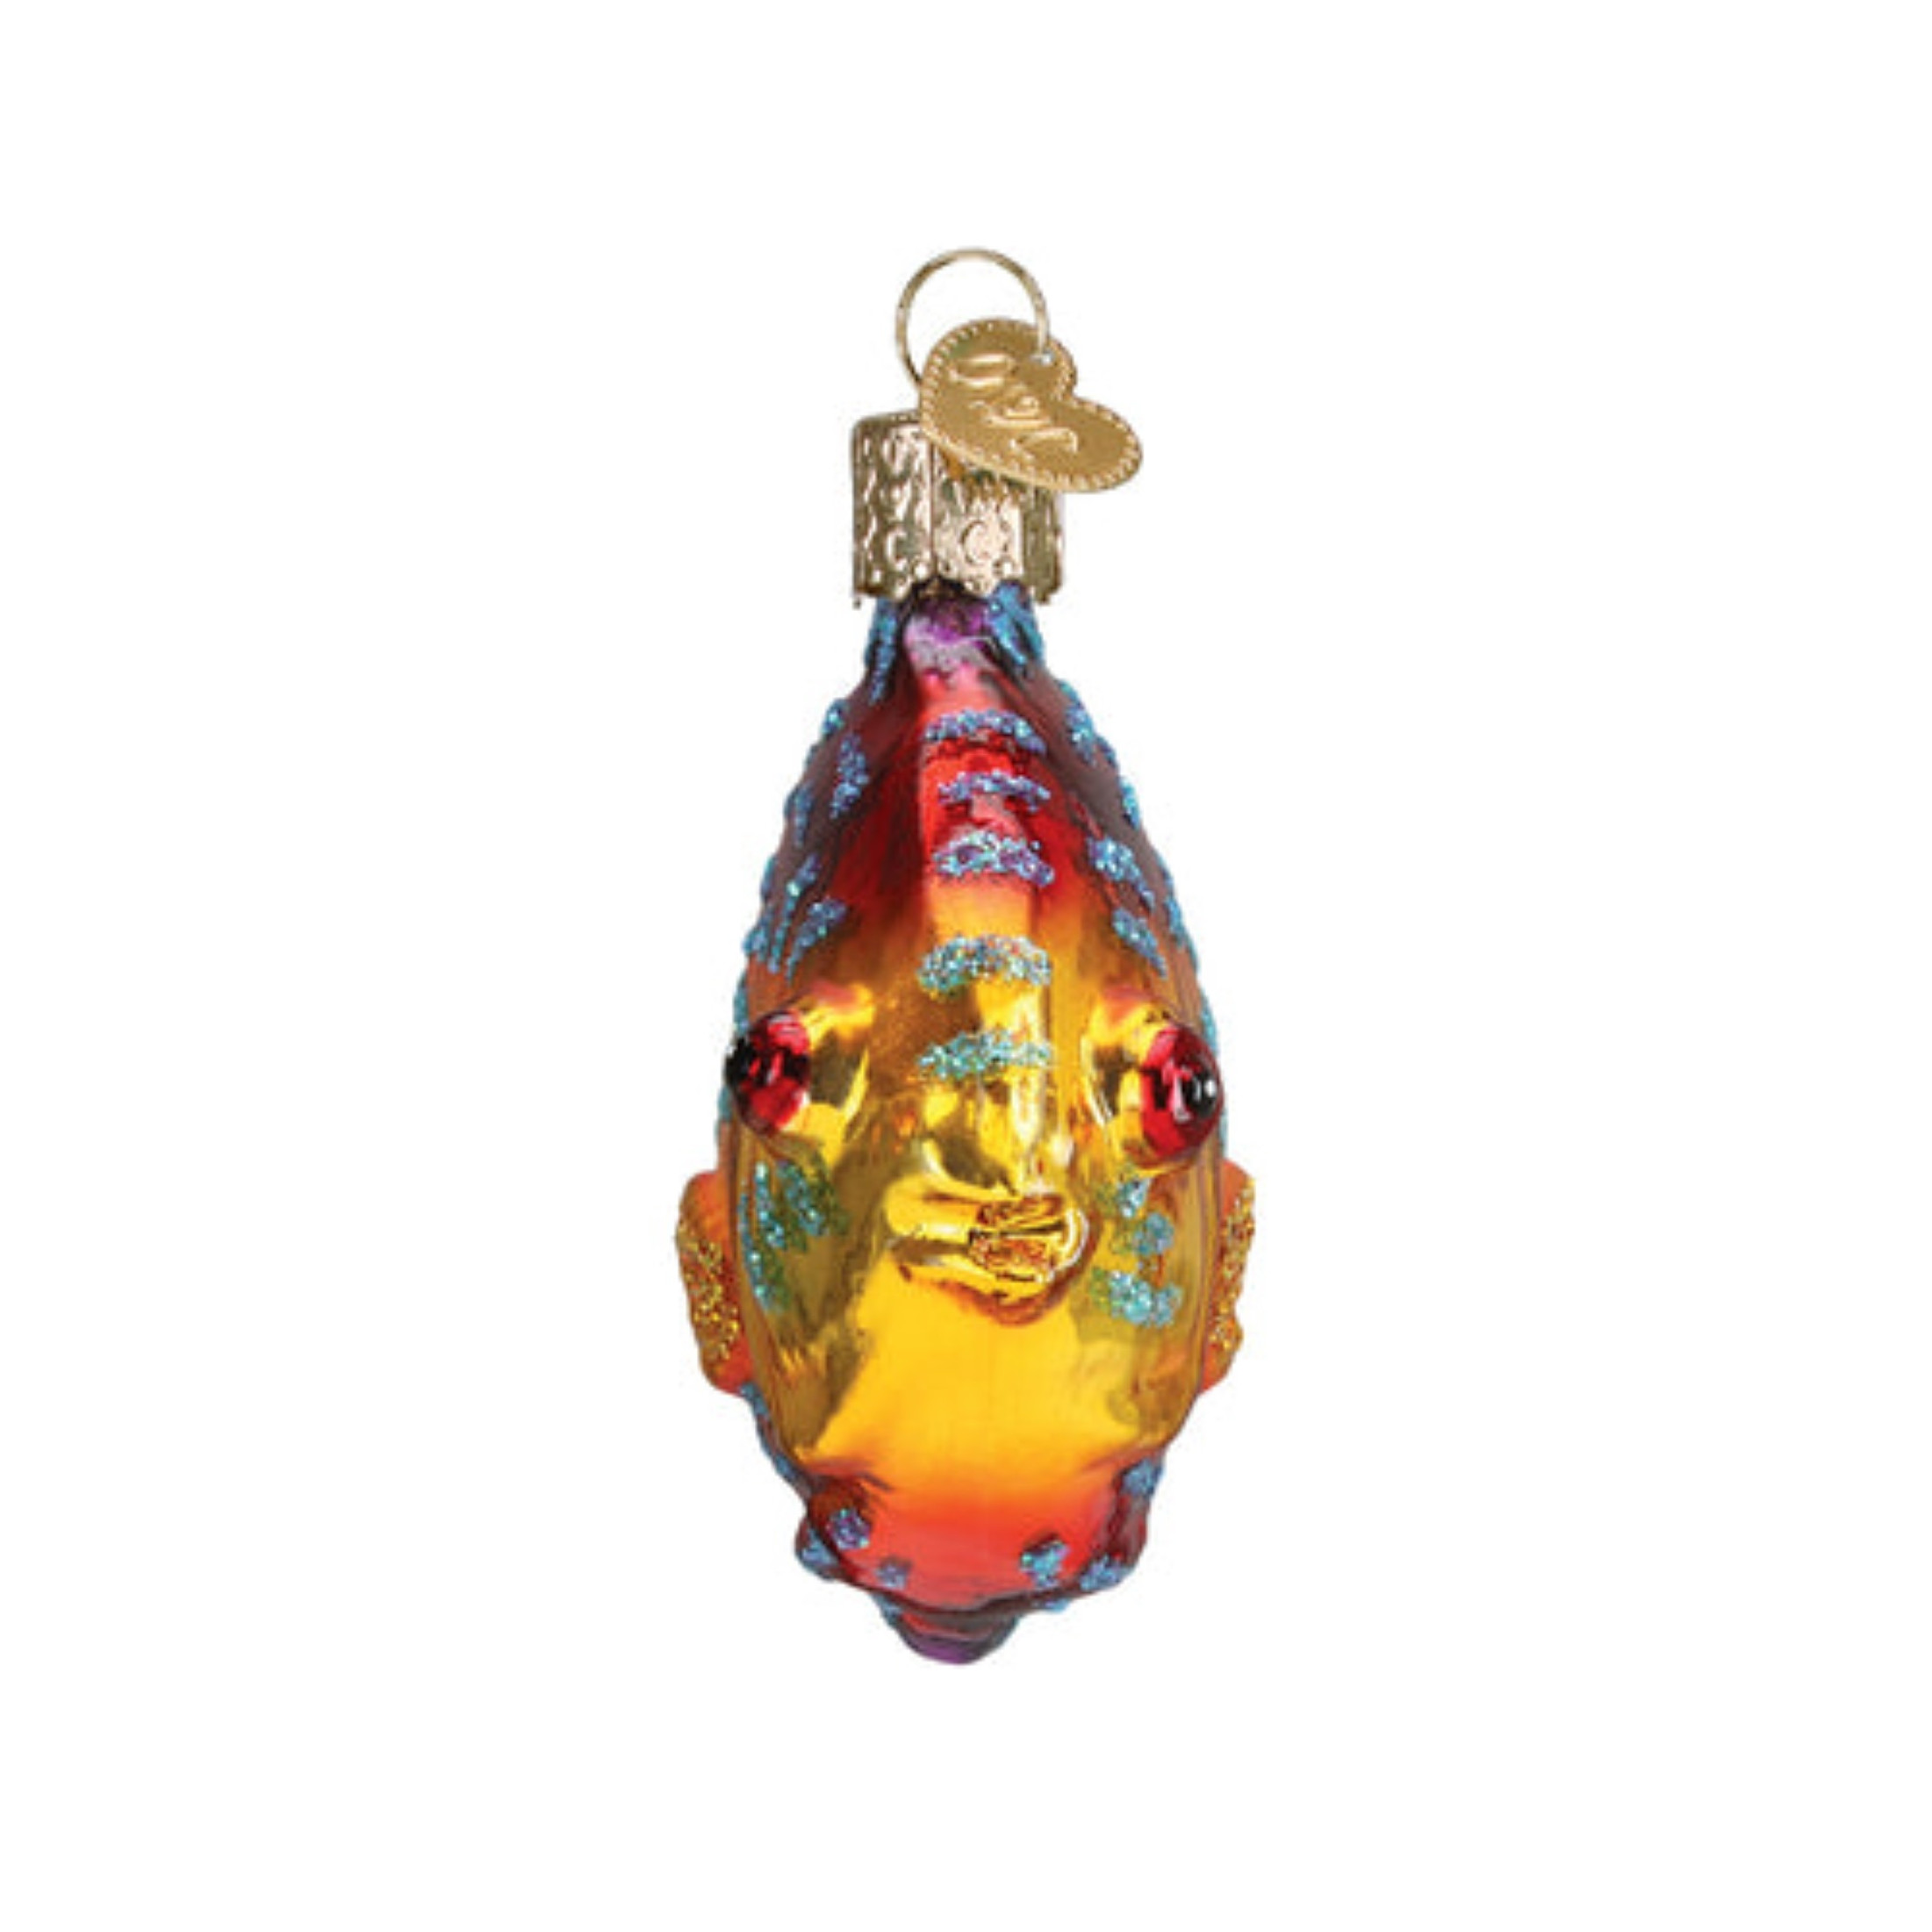 Old World Christmas Blown Glass Christmas Ornament, Discus Fish